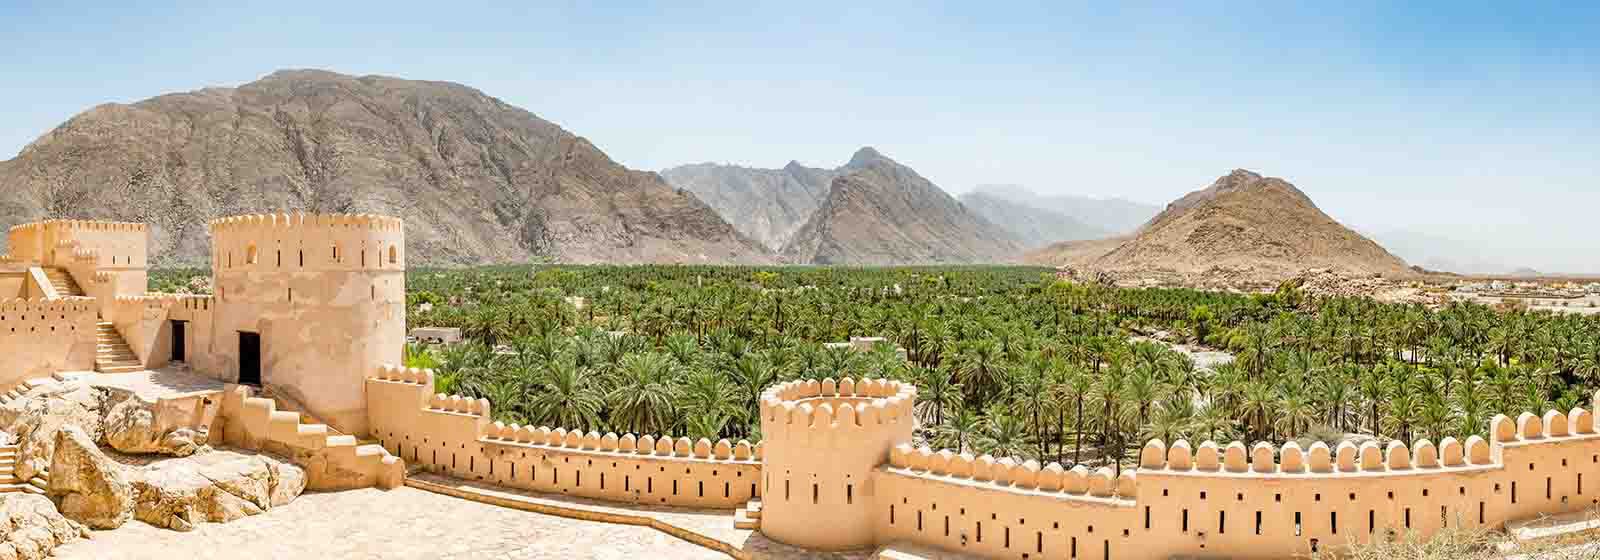 Nakhal in the Al Batinah Region of Oman. It is located about 120 km to the west of Muscat, the capital of Oman. It is known as the town of oasis.; Shutterstock ID 325083719